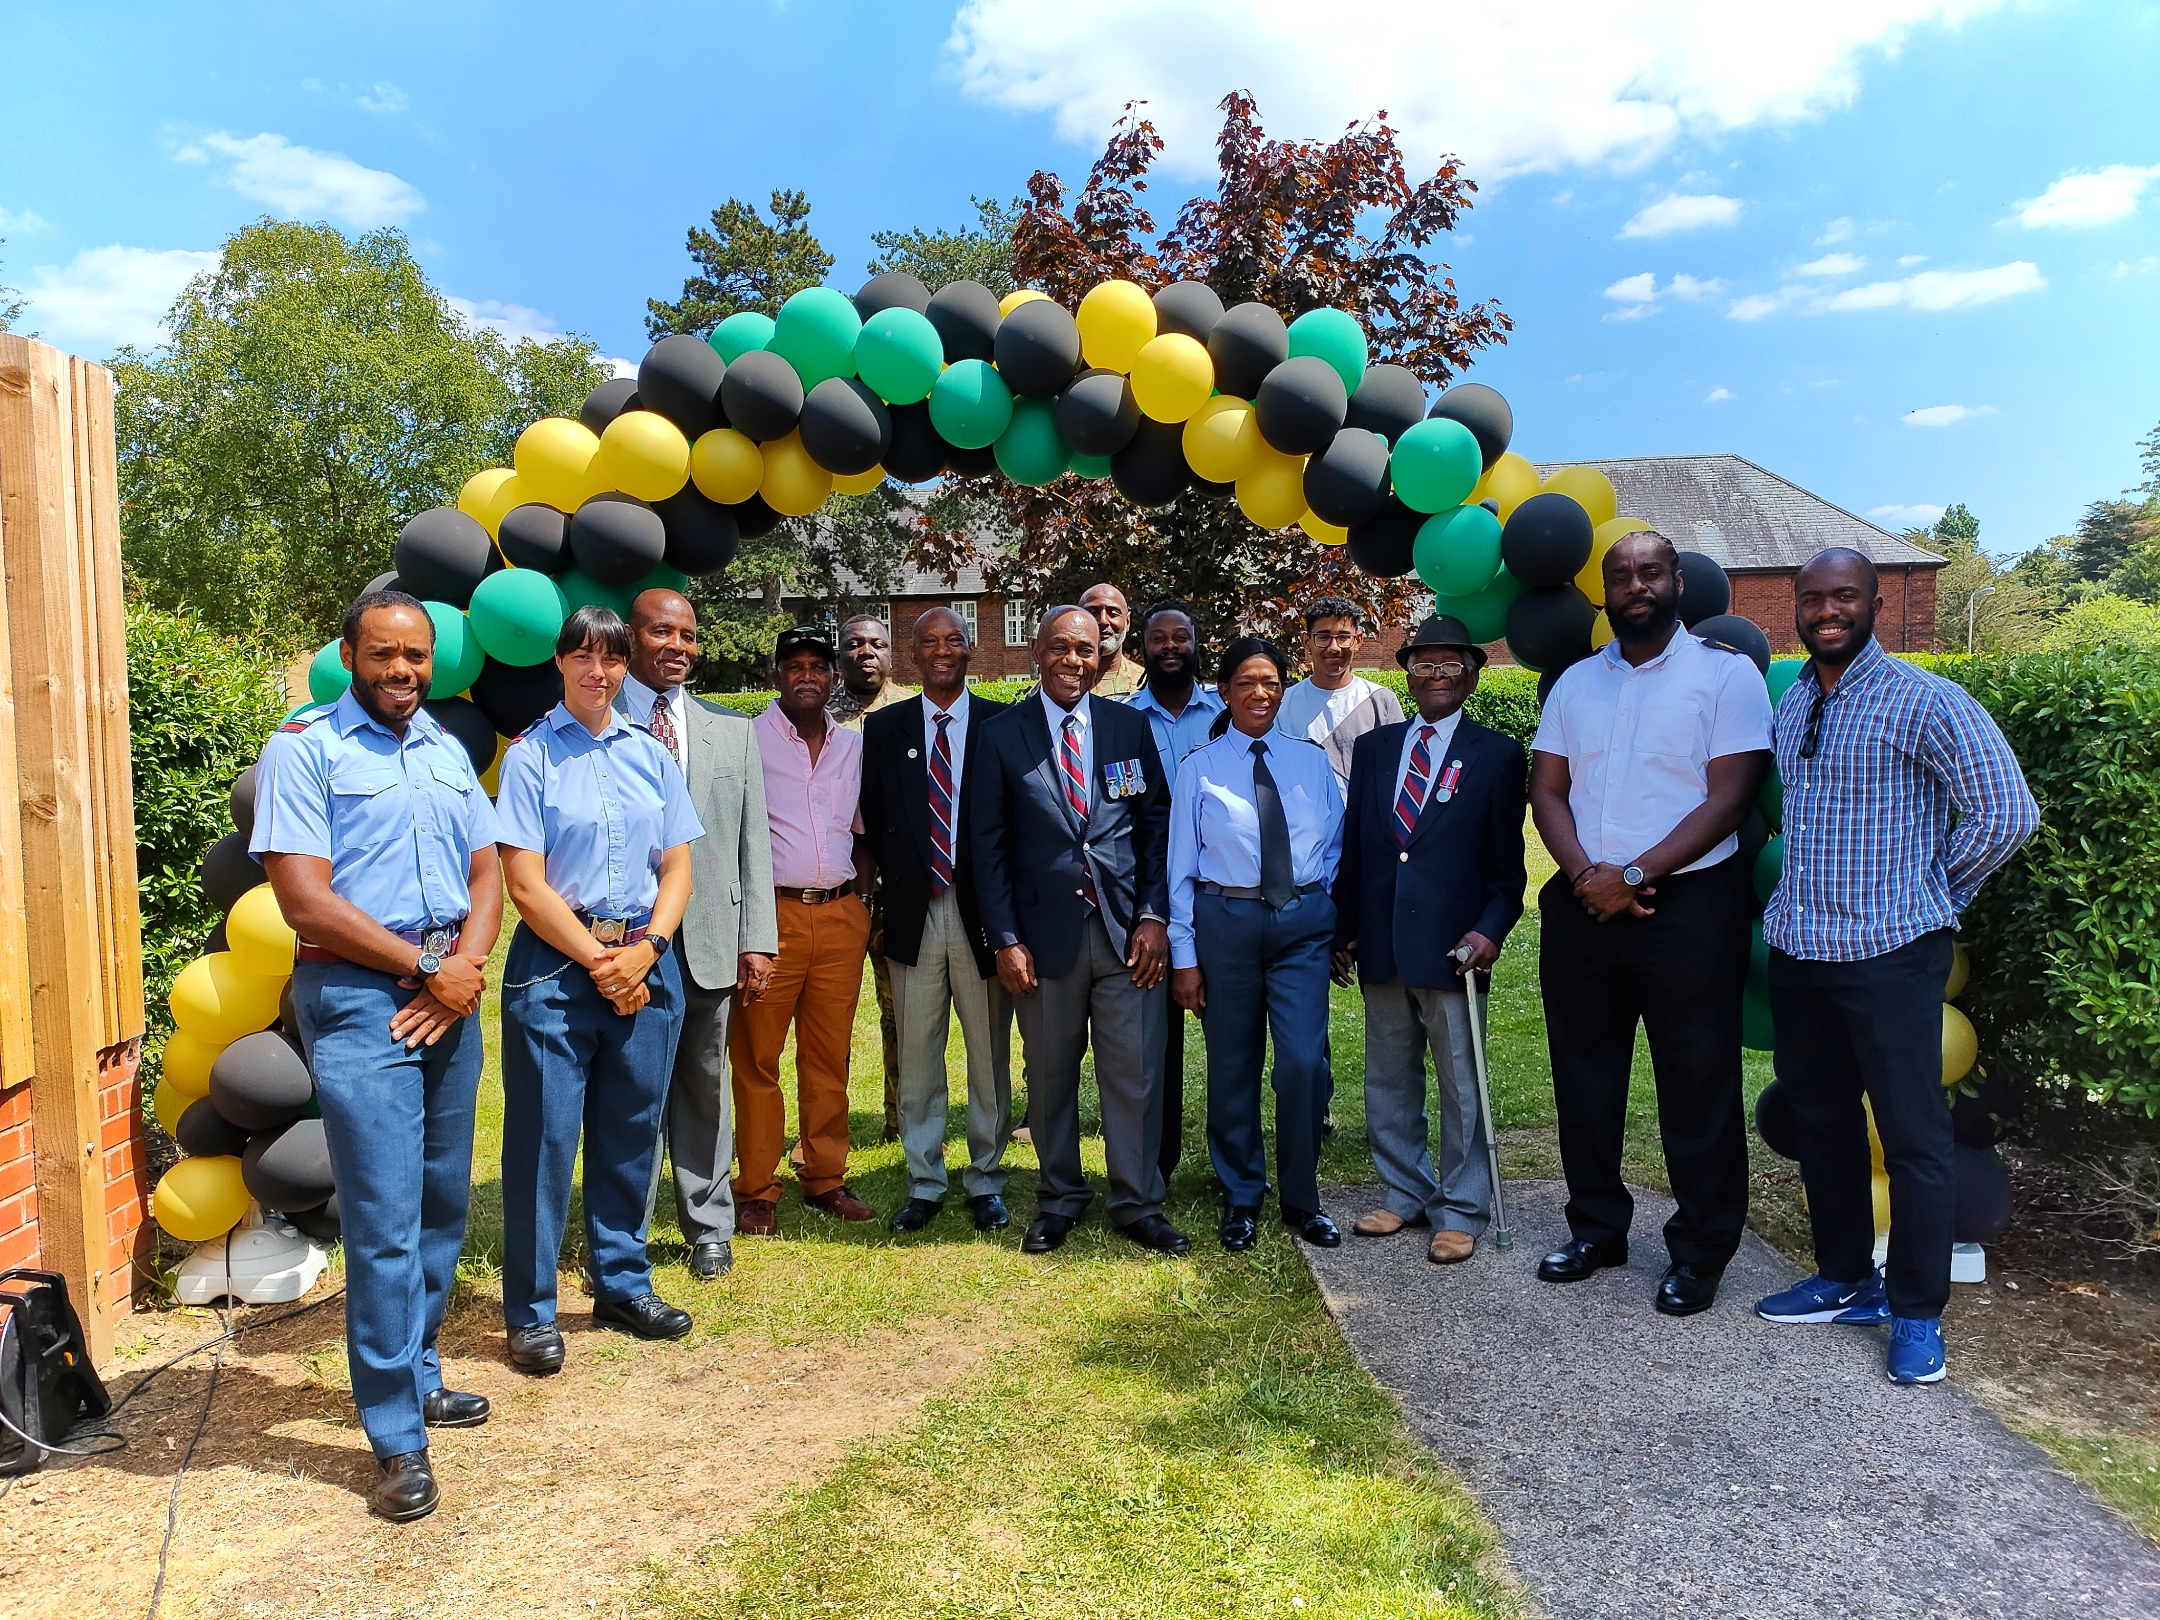 Jamaican aviators smiling under arc of balloons in the colours of the Jamaican flag.